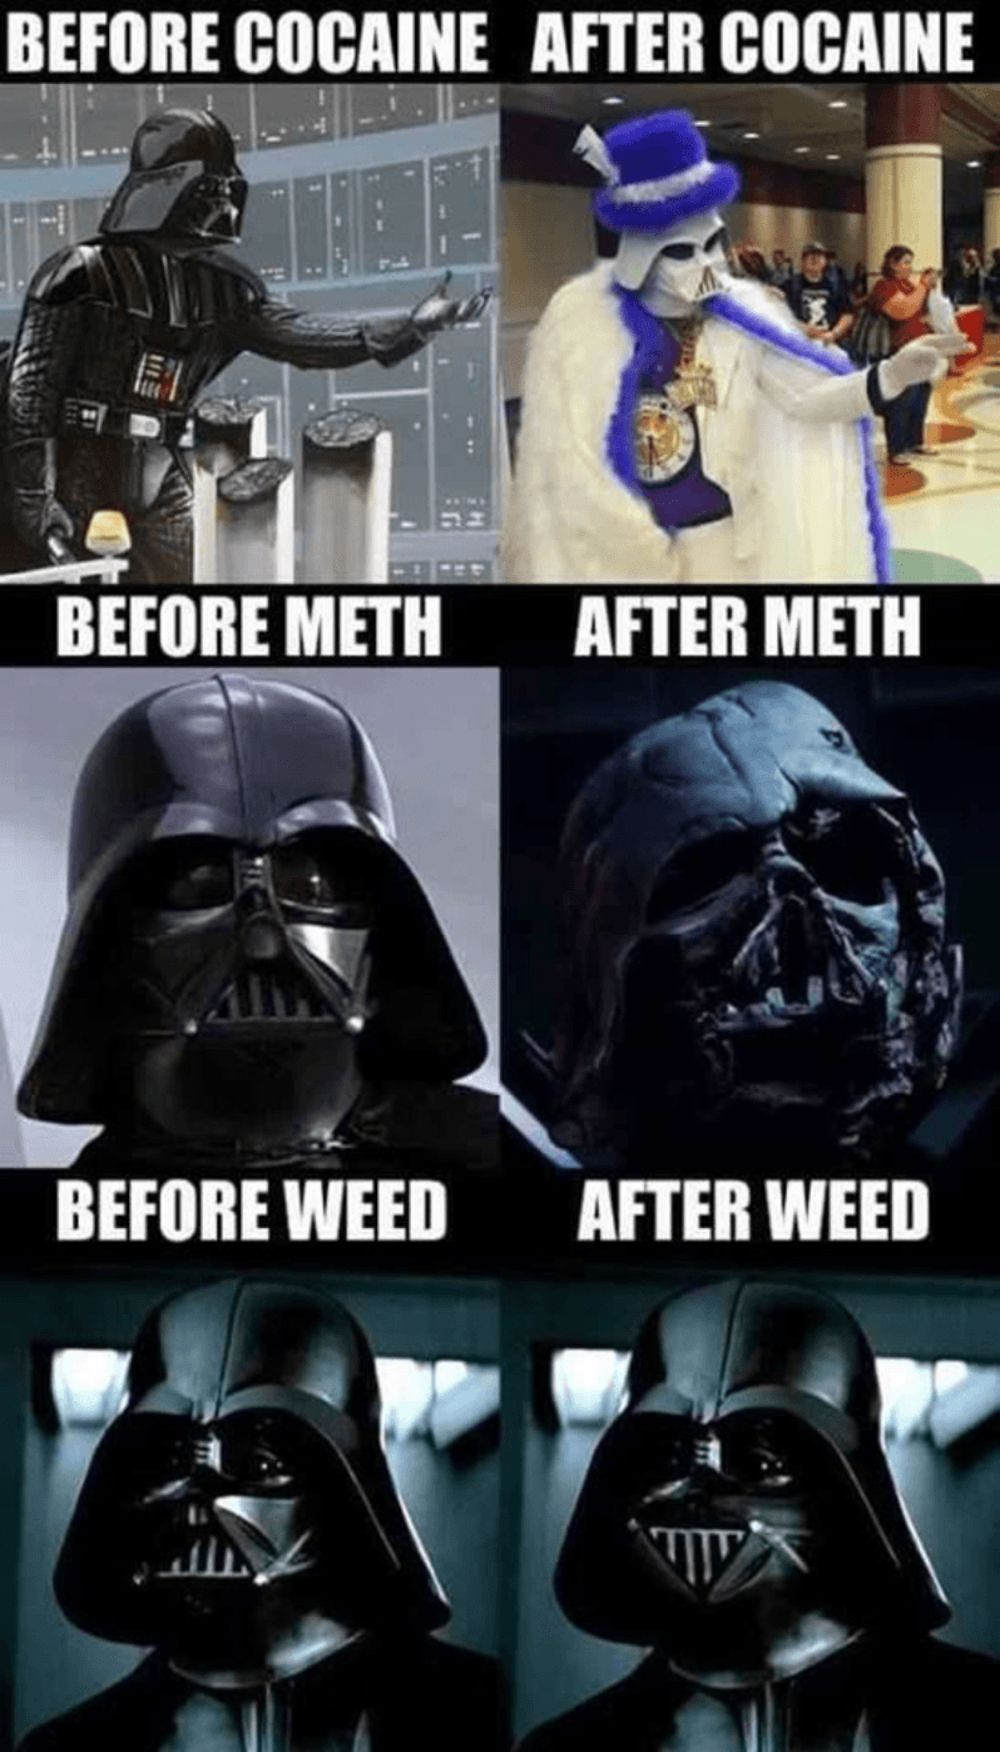 darth-vader-before-and-after-drugs